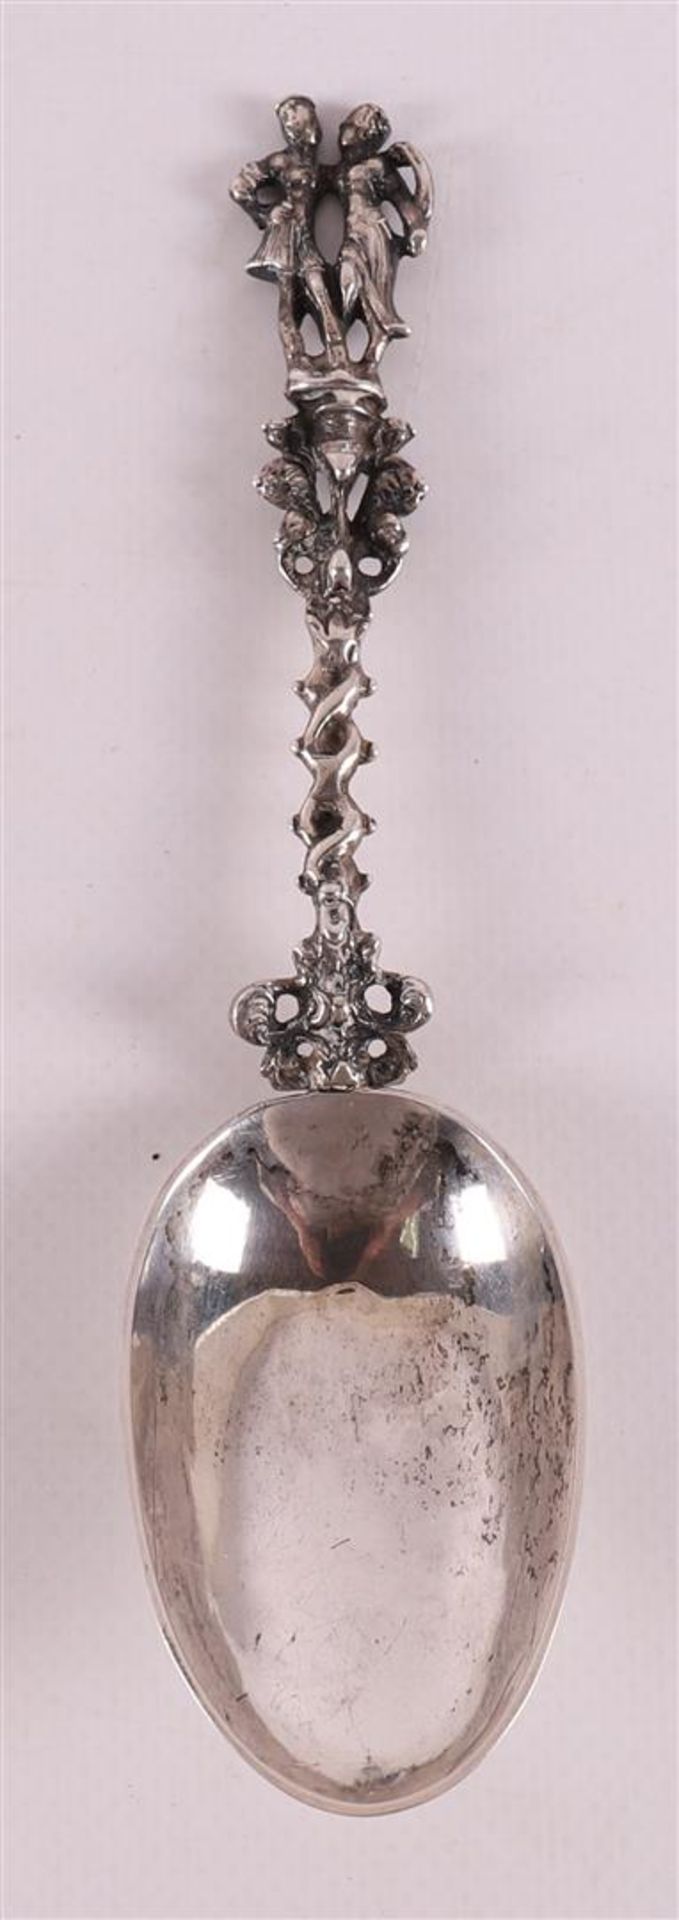 A silver birth spoon with crowning couple, Friesland, 19th century.